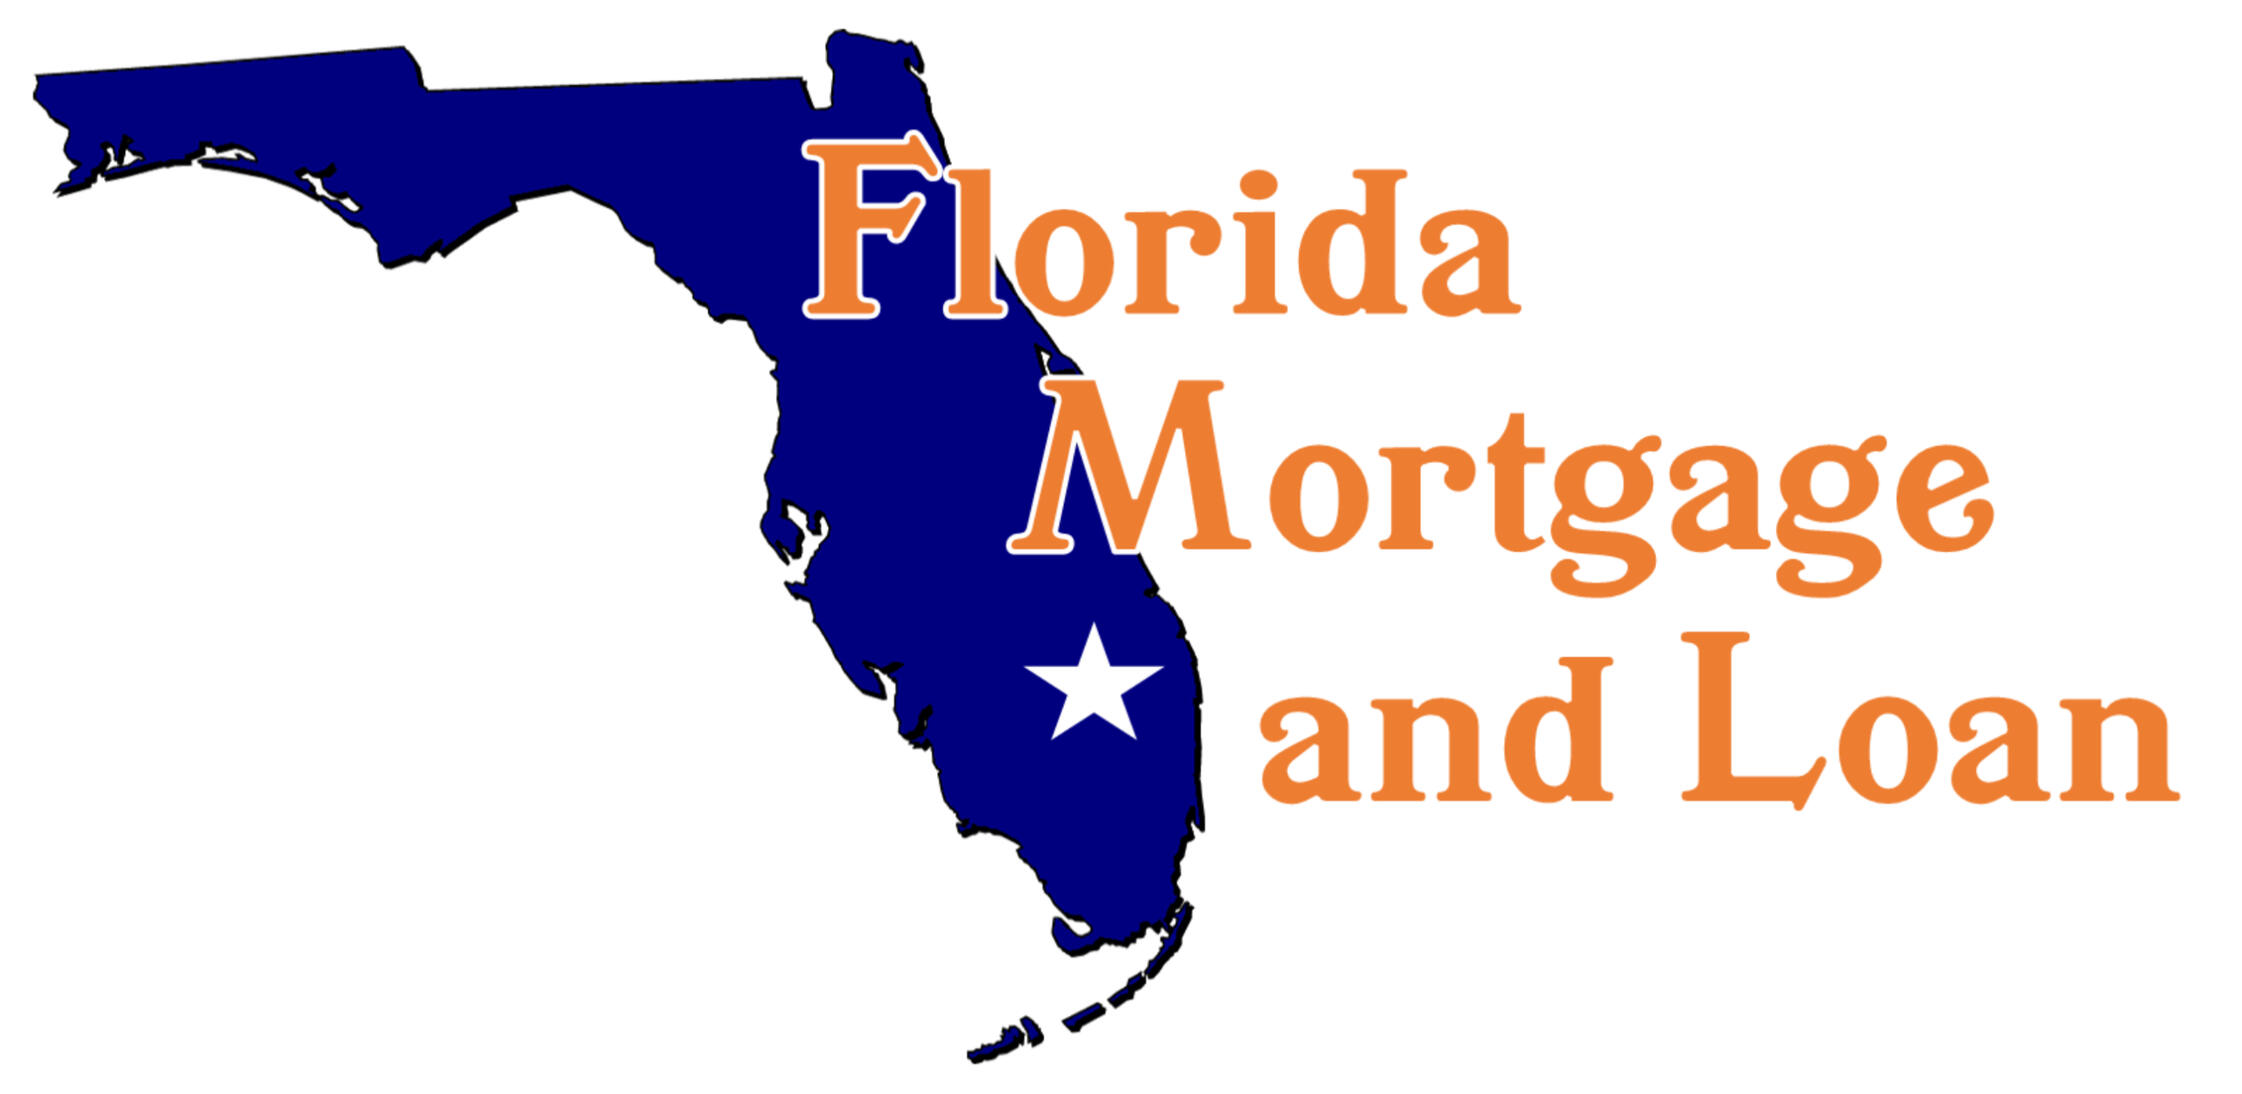 Florida Mortgage and Loan in Port St. Lucie